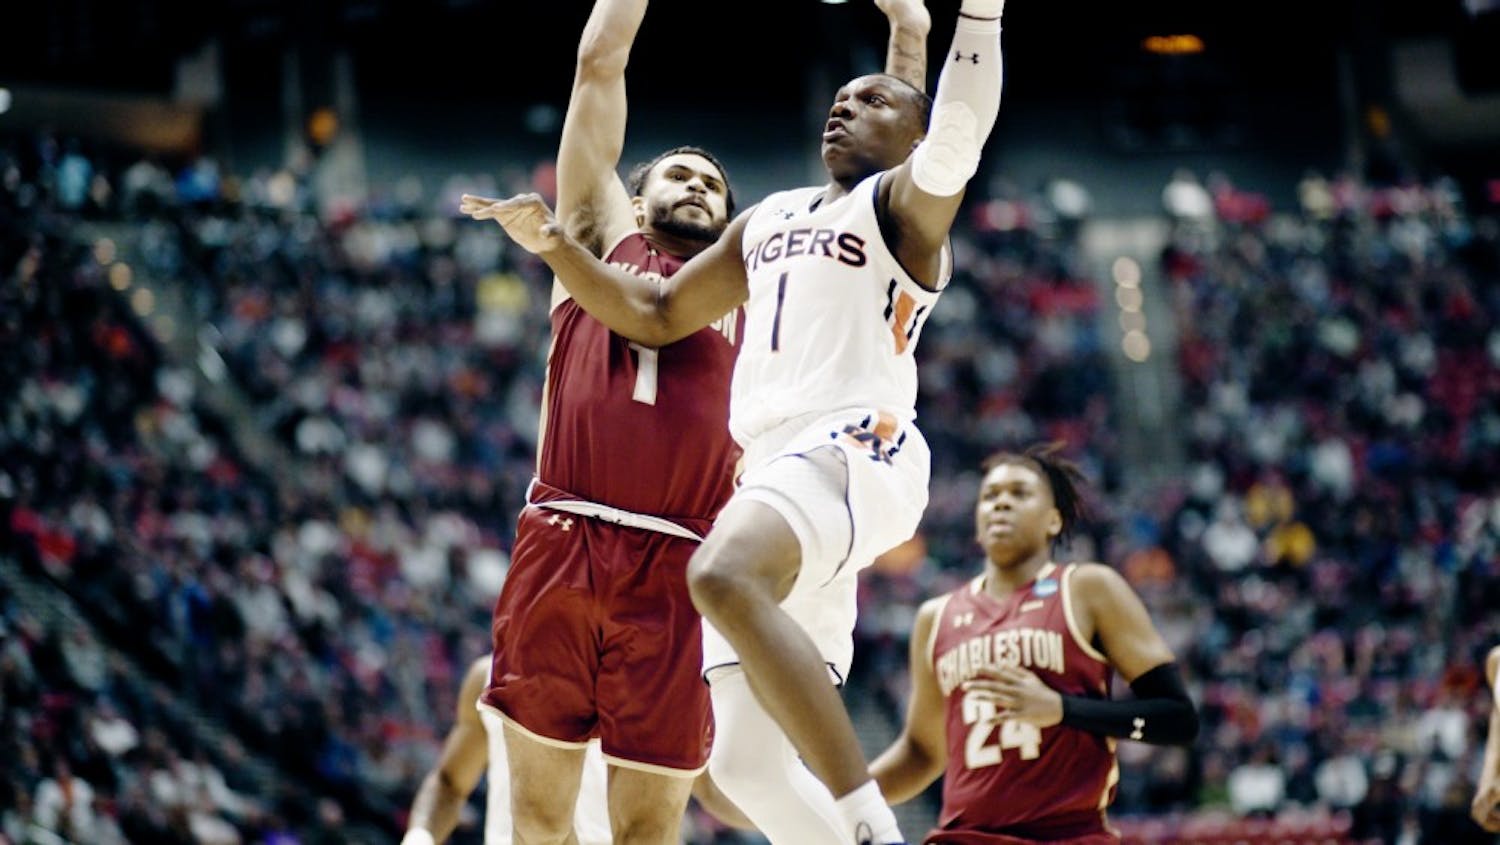 Jared Harper (1) shoots&nbsp;during Auburn vs. College of Charleston on March 16, 2018 in San Diego, Calif.